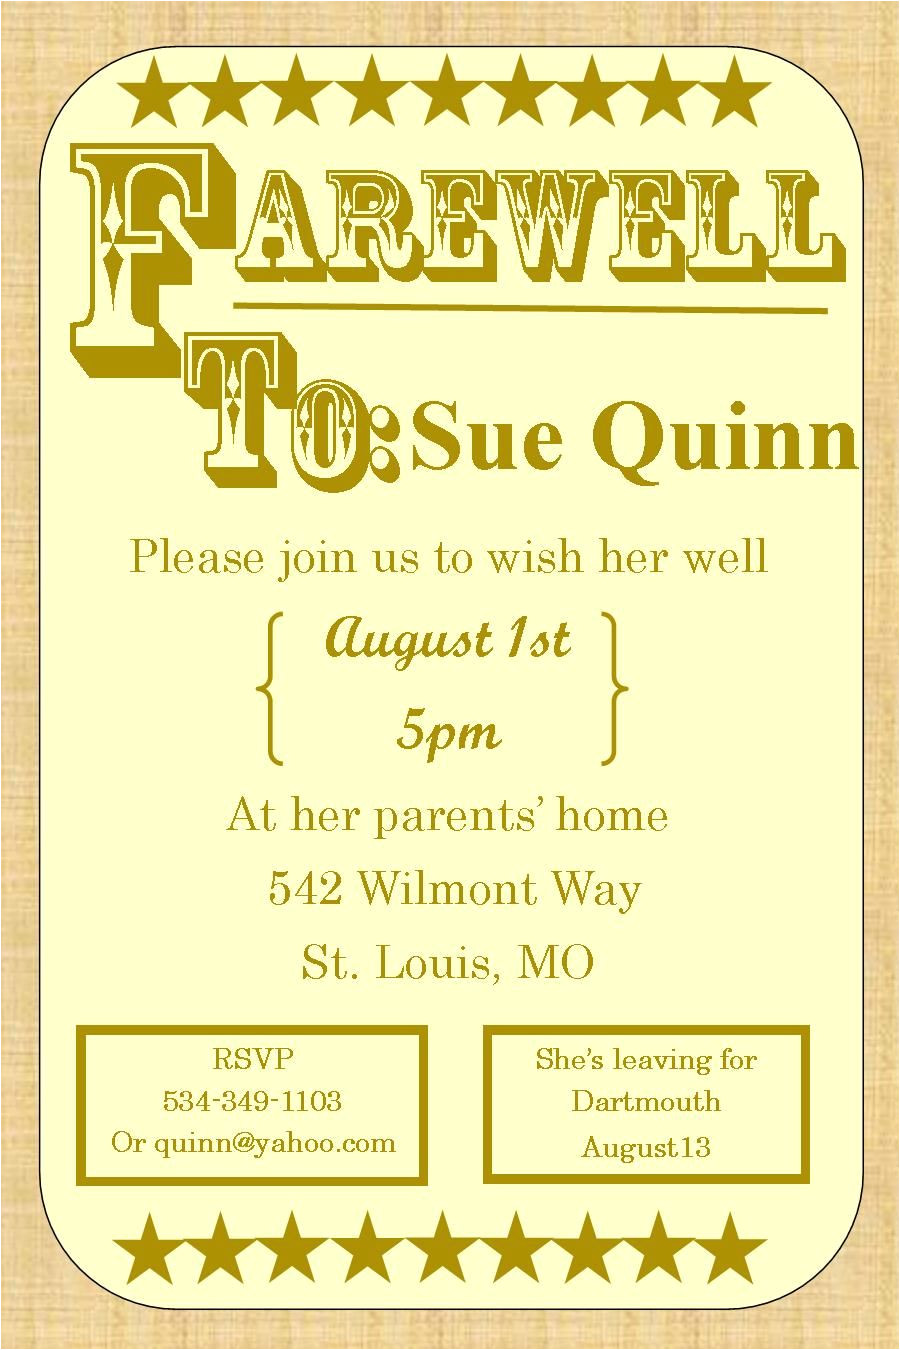 Farewell Invitation Card for Principal Going Away Party Invitations Farewell Burlap with Images